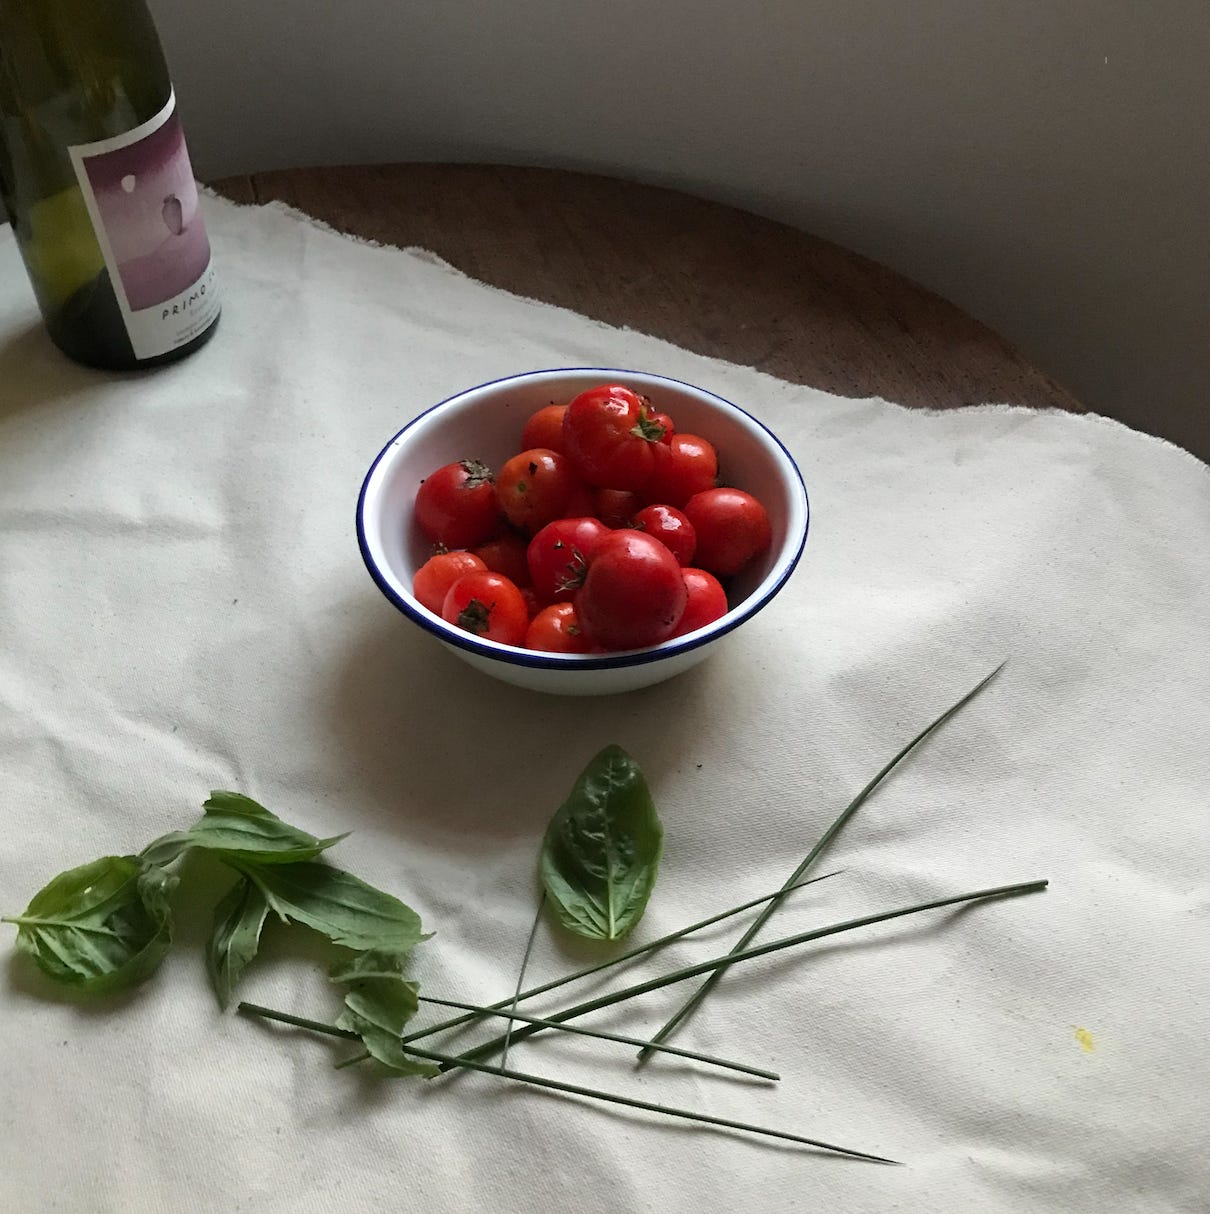 A piece of cream canvas is spread at an angle across a table. To the left, a large empty green glass wine bottle. In the centre is a white enamel bowl with a blue rim, full of bright red ripe tomatoes, of varying shapes and sizes. They gleam. In the foreground, the split long stems and leaves of some basil. 